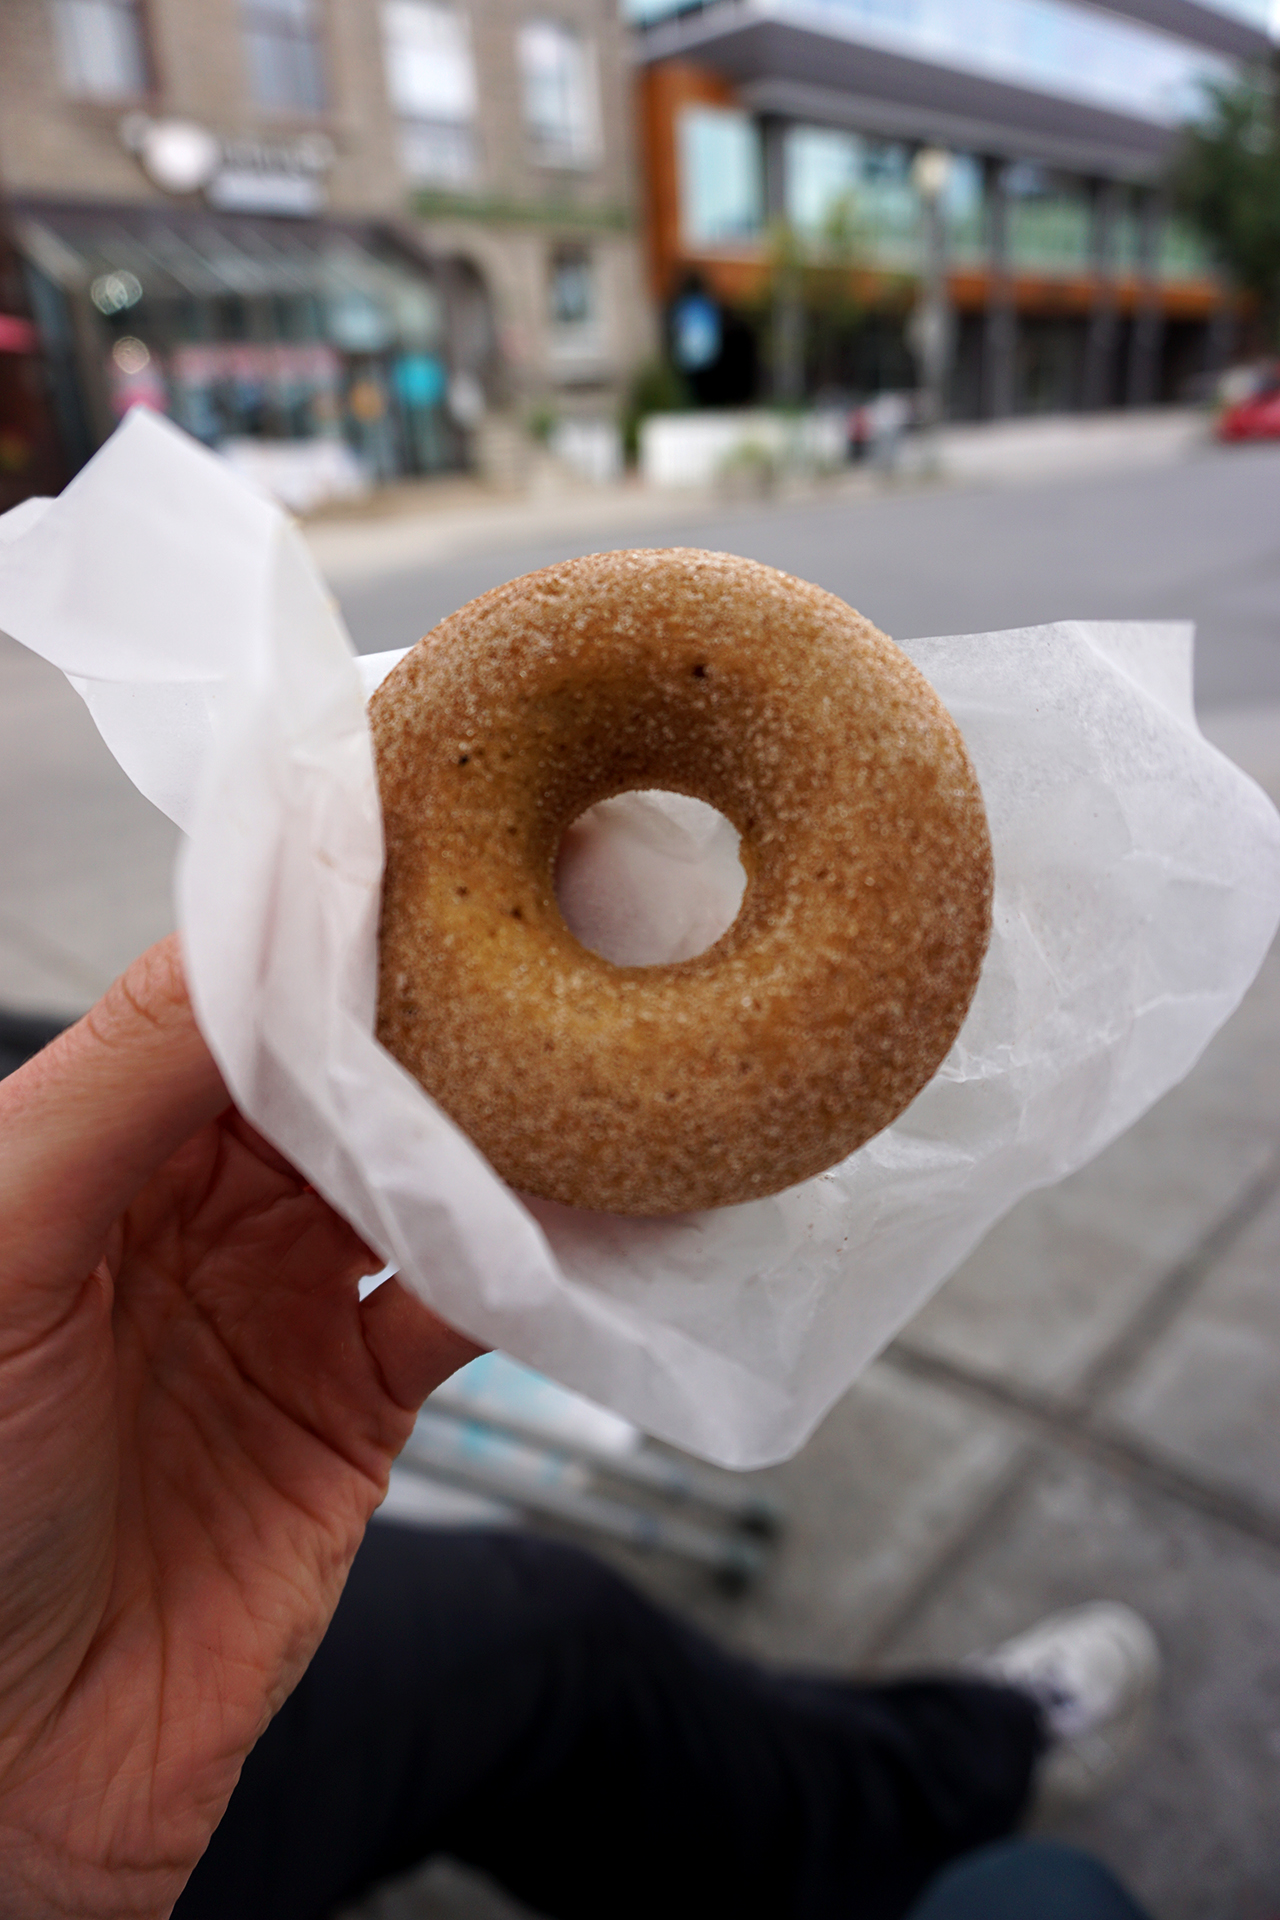 Gluten free doughnut from Petit Lapin Bakery - gluten free bakery in Montreal, Quebec, Canada